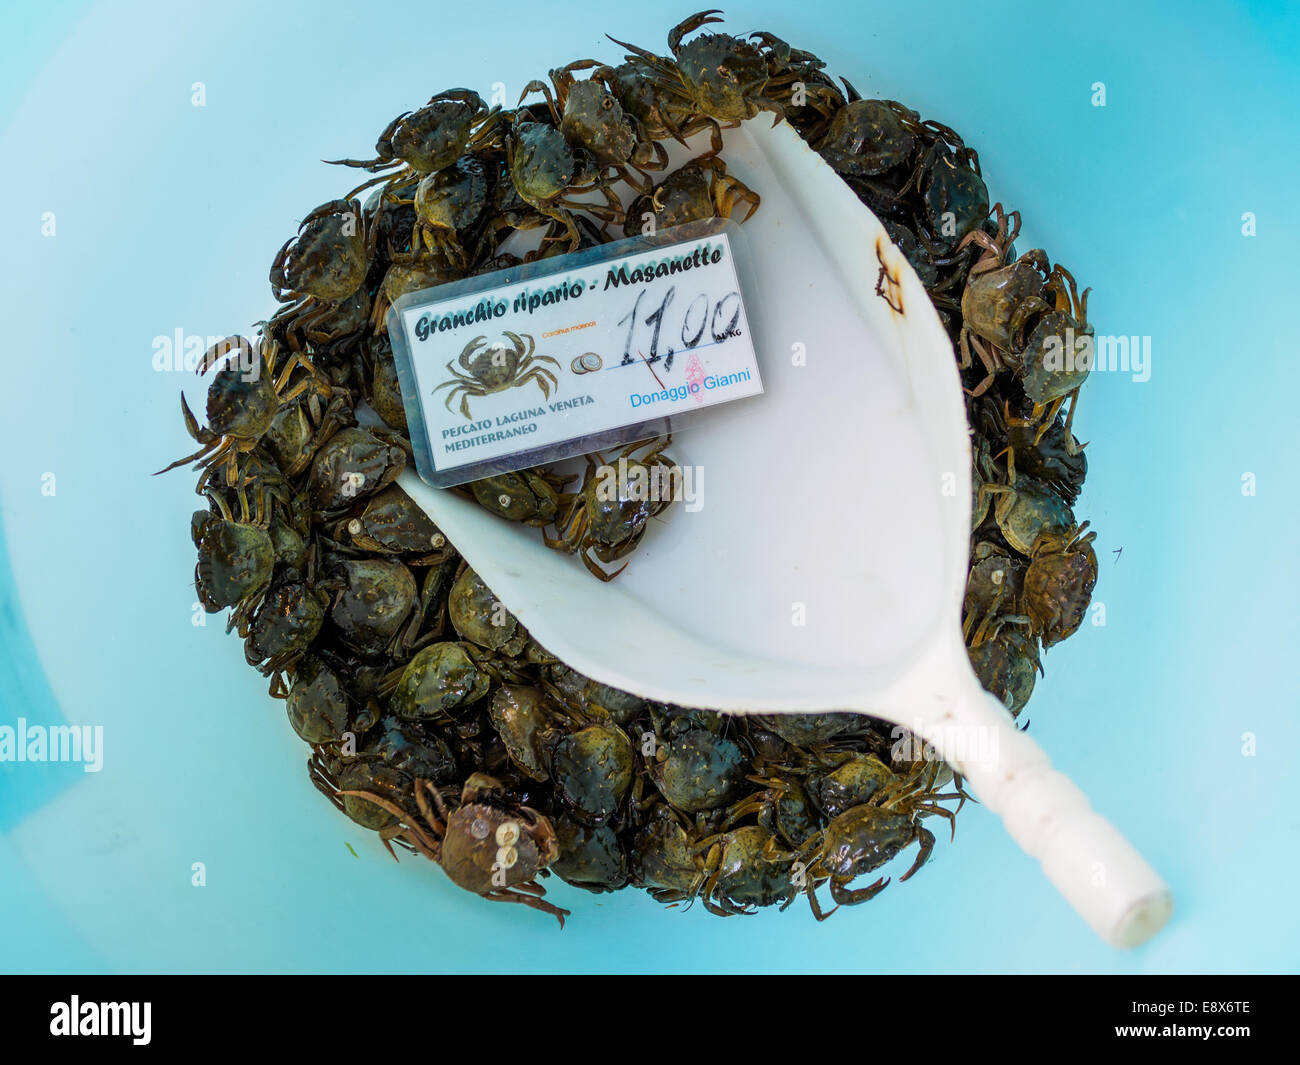 Close-up of bucket with a shovel full of shore crabs, on sale at Rialto market in Venice, Italy. Stock Photo